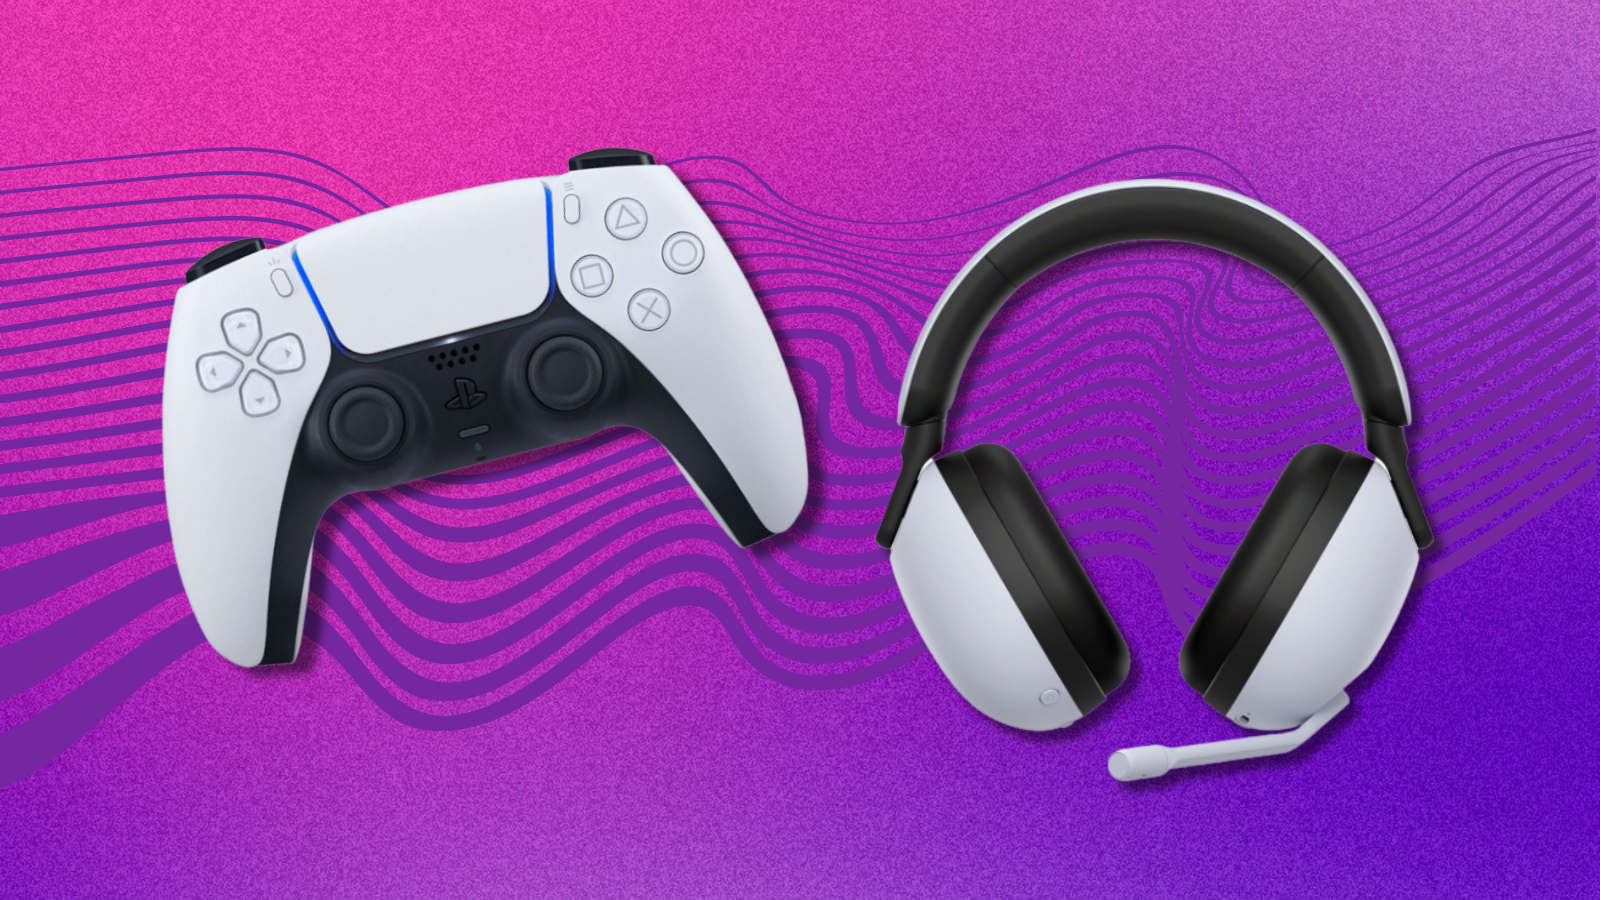 a playstation dualsense wireless controller and a sony inzone gaming headset against a pink and purple gradient background